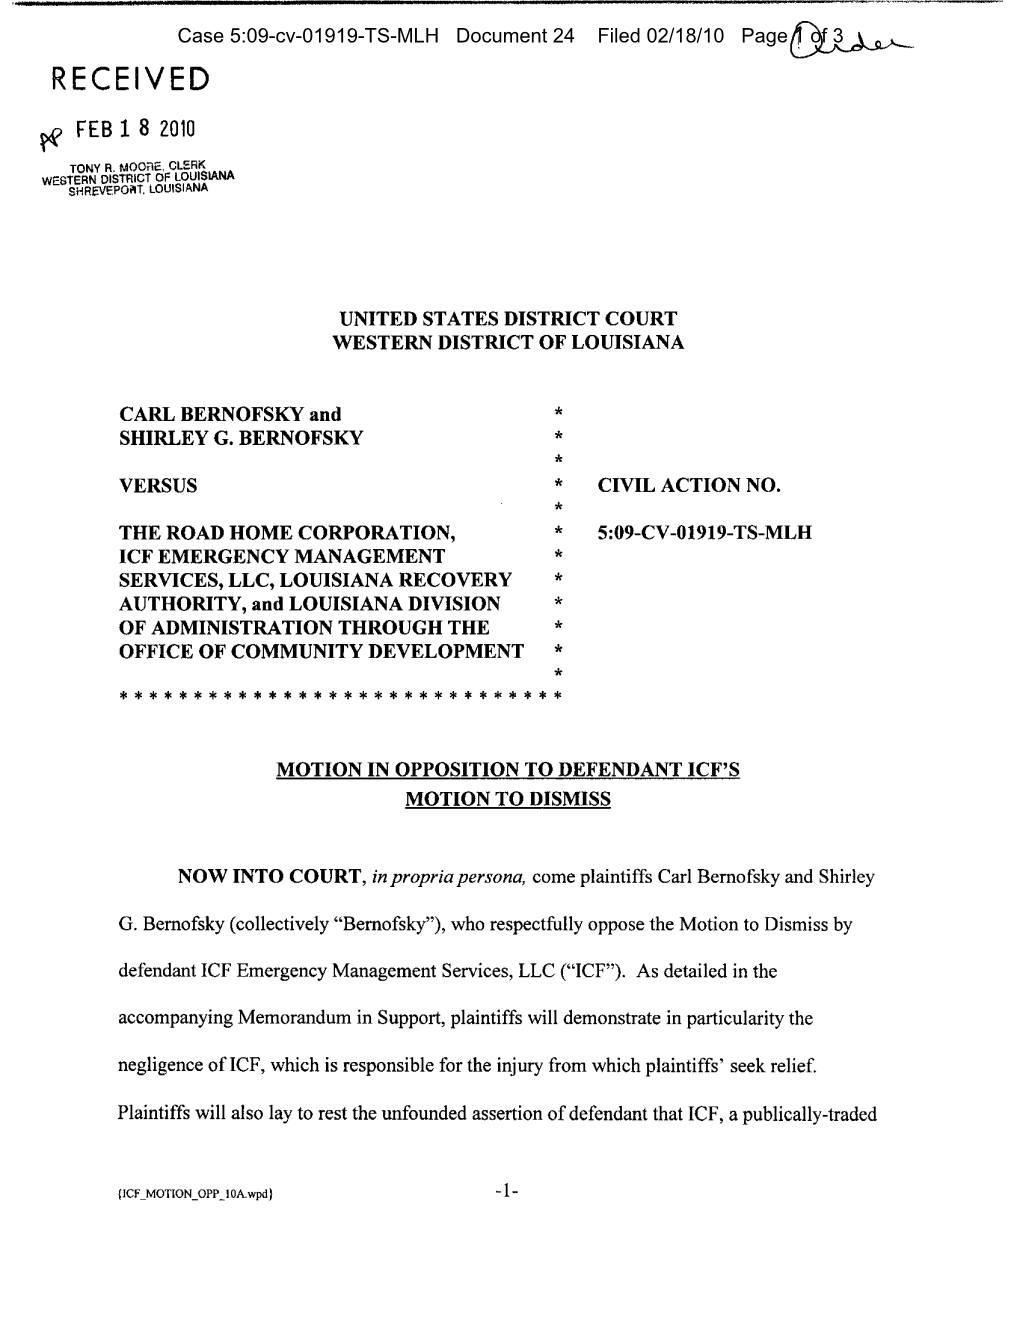 Case 5:09-Cv-01919-TS-MLH Document 24 Filed 02/18/10 Page